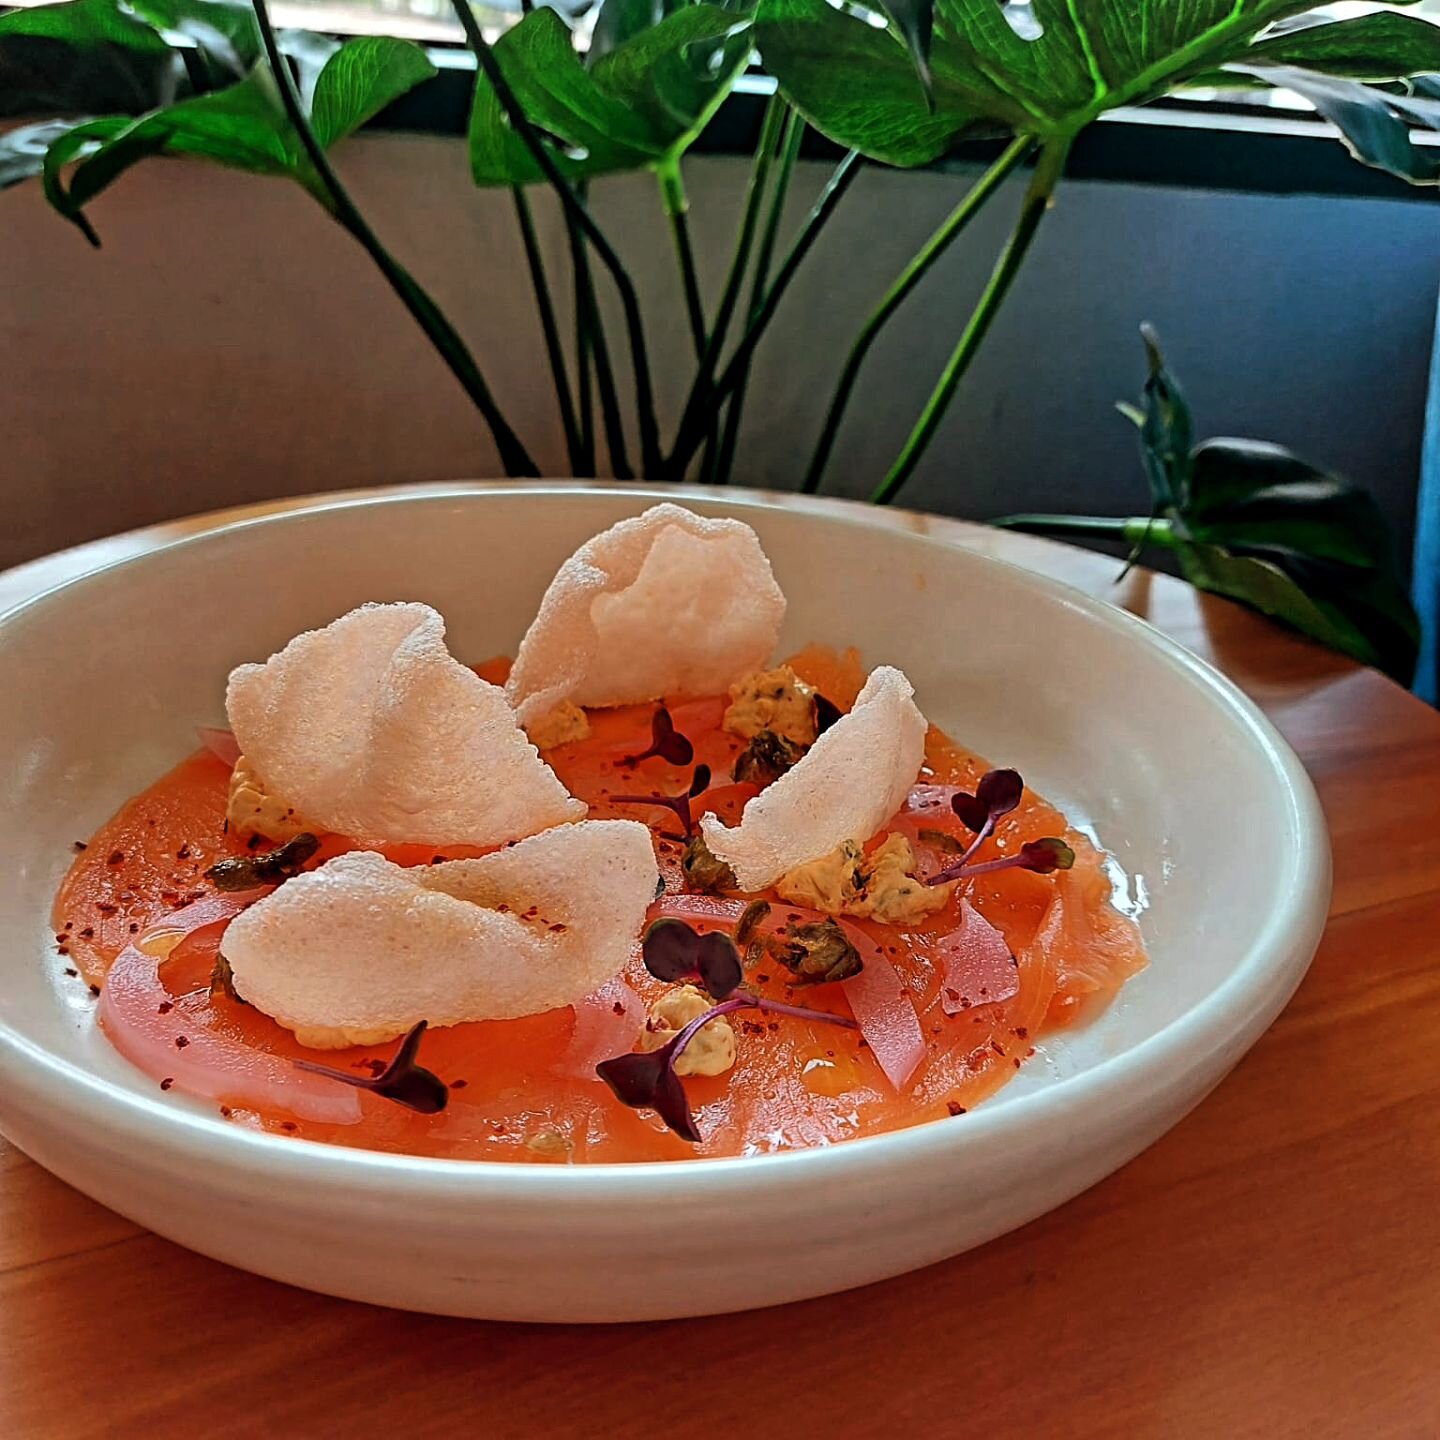 And now, from the bottom of the sea.

Salmon Carpaccio with the beautiful @akaroasalmonnz, kimchi cream cheese, popped capers, pickled onions, lemon oil &amp; prawn crackers

Calamari with lemon mayo and furikake sesame salt

More new dishes are comi